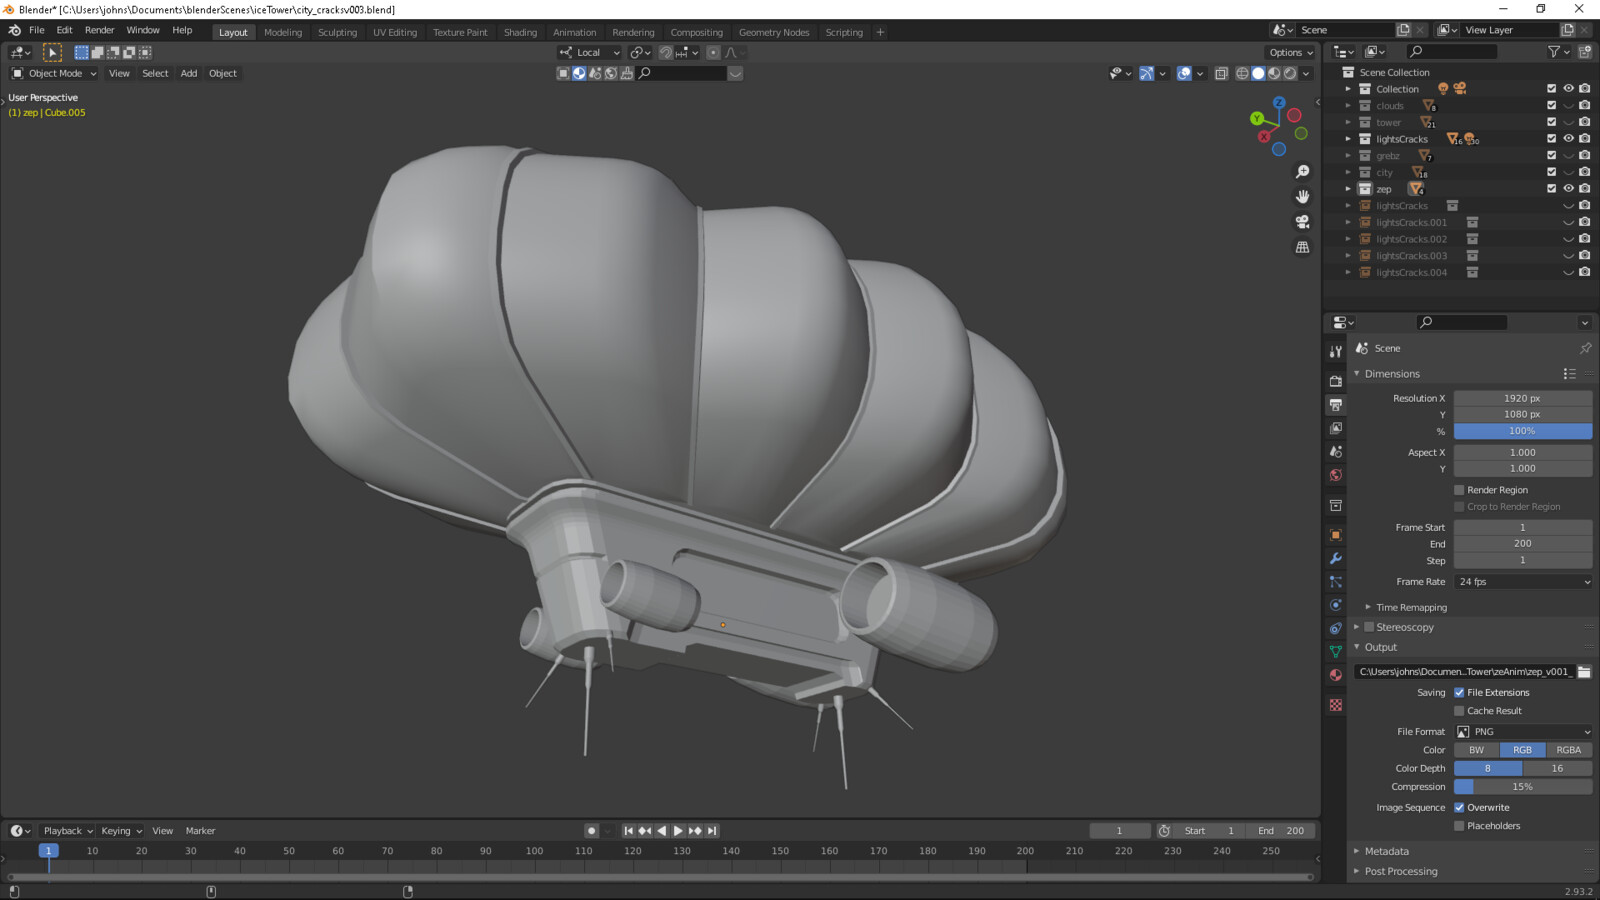 Added a zeppelin style thing.